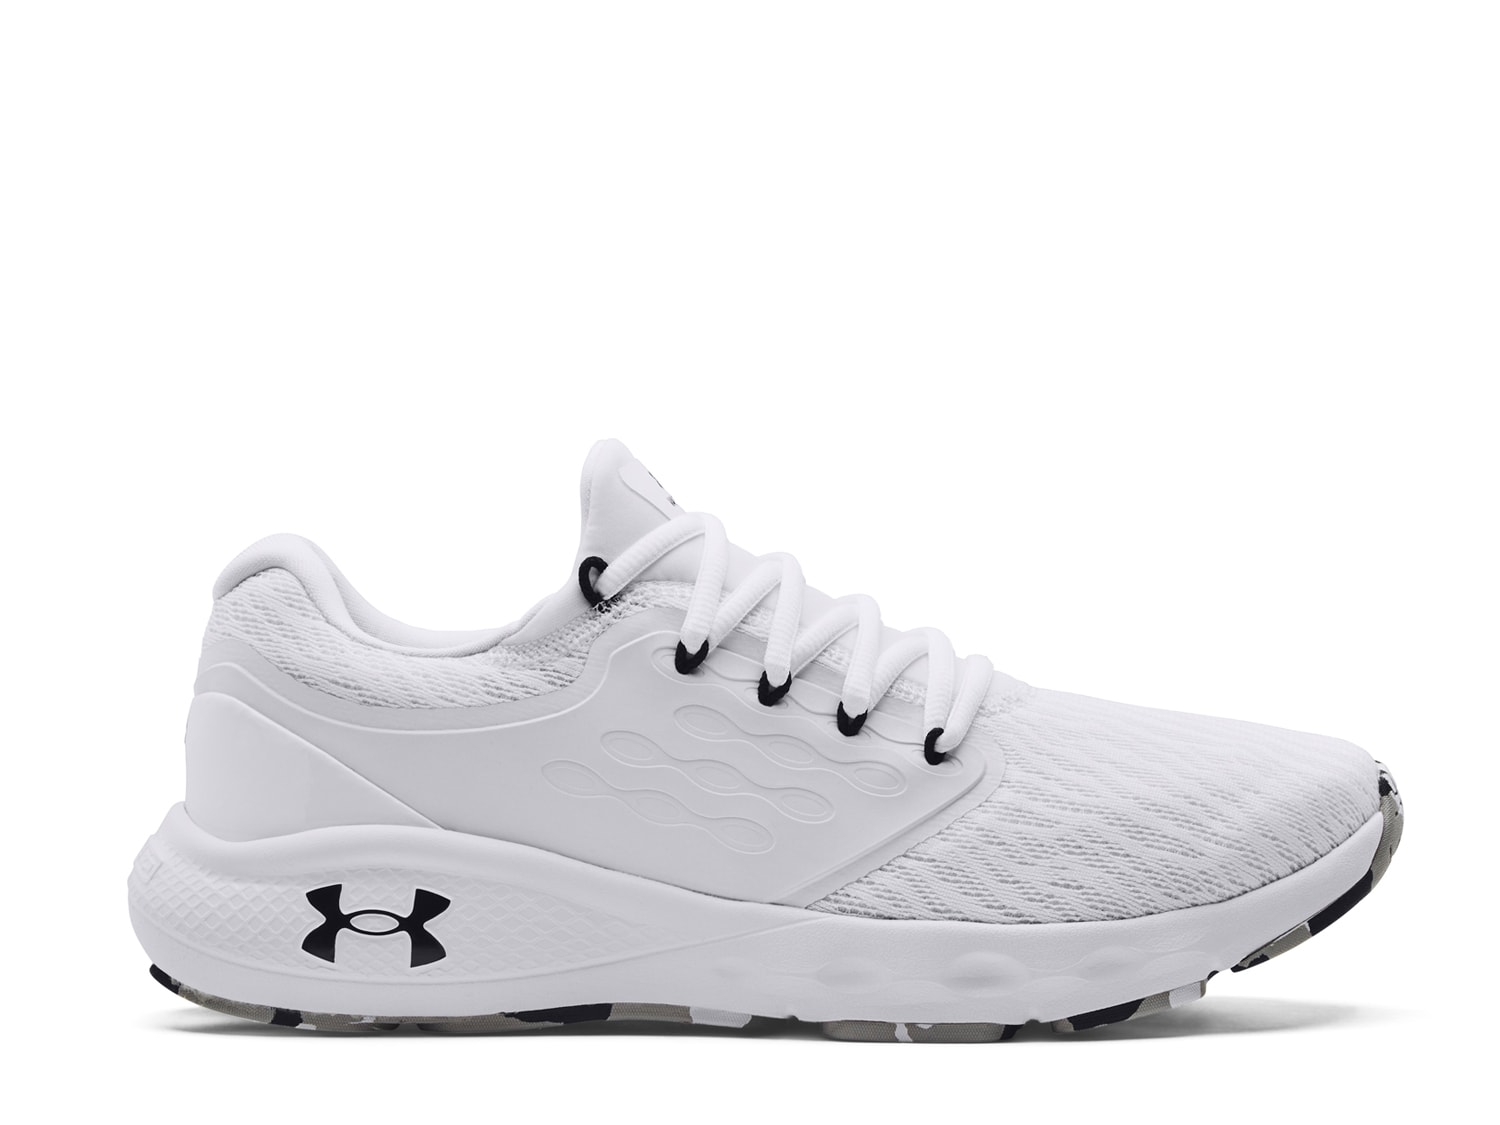 Under Armour Charged Vantage Running Shoe - Men's - Free Shipping | DSW